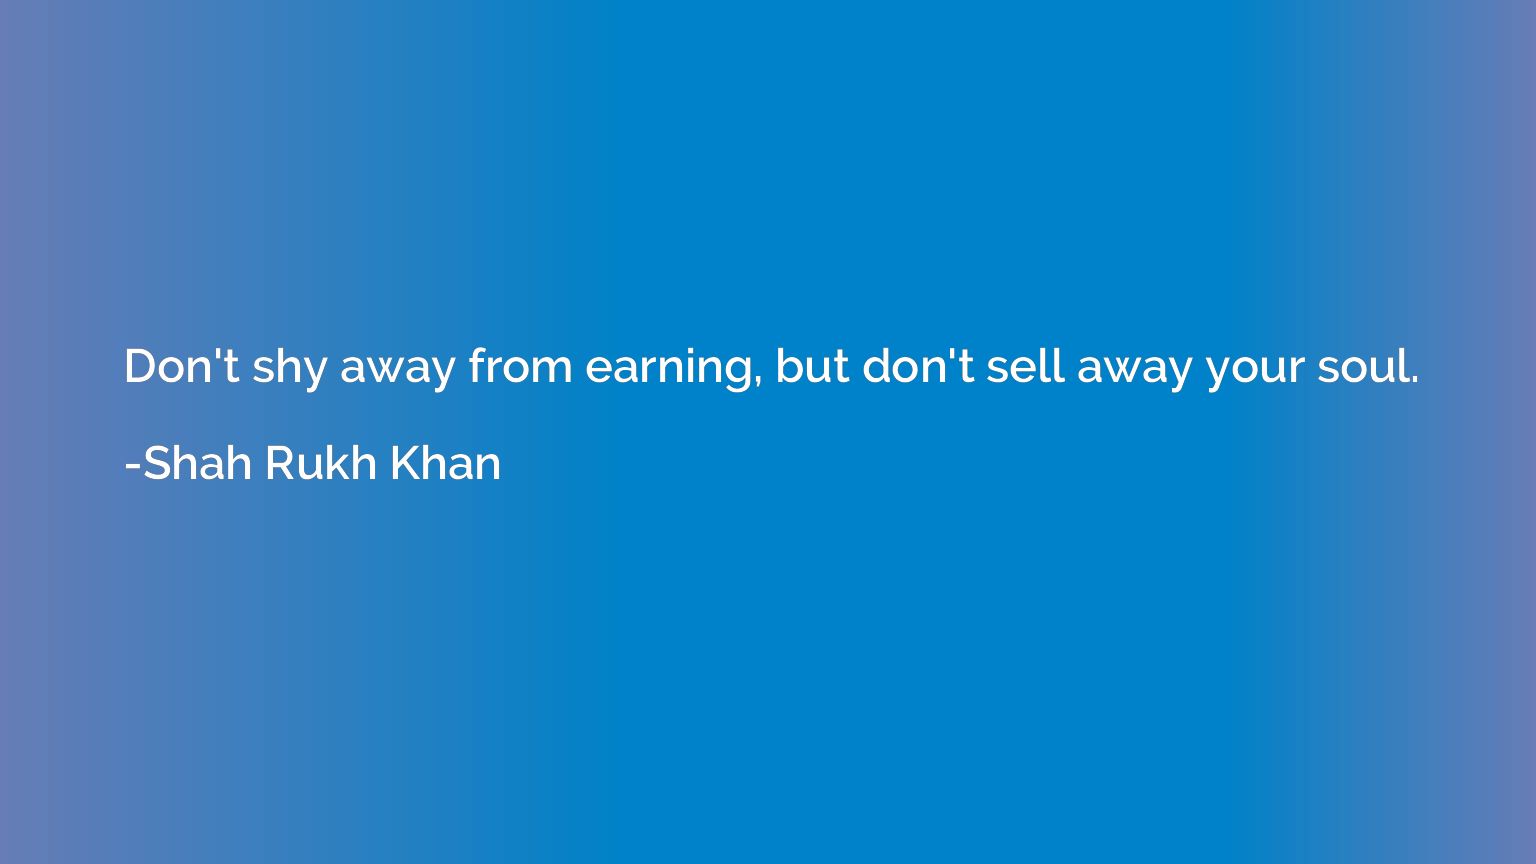 Don't shy away from earning, but don't sell away your soul.